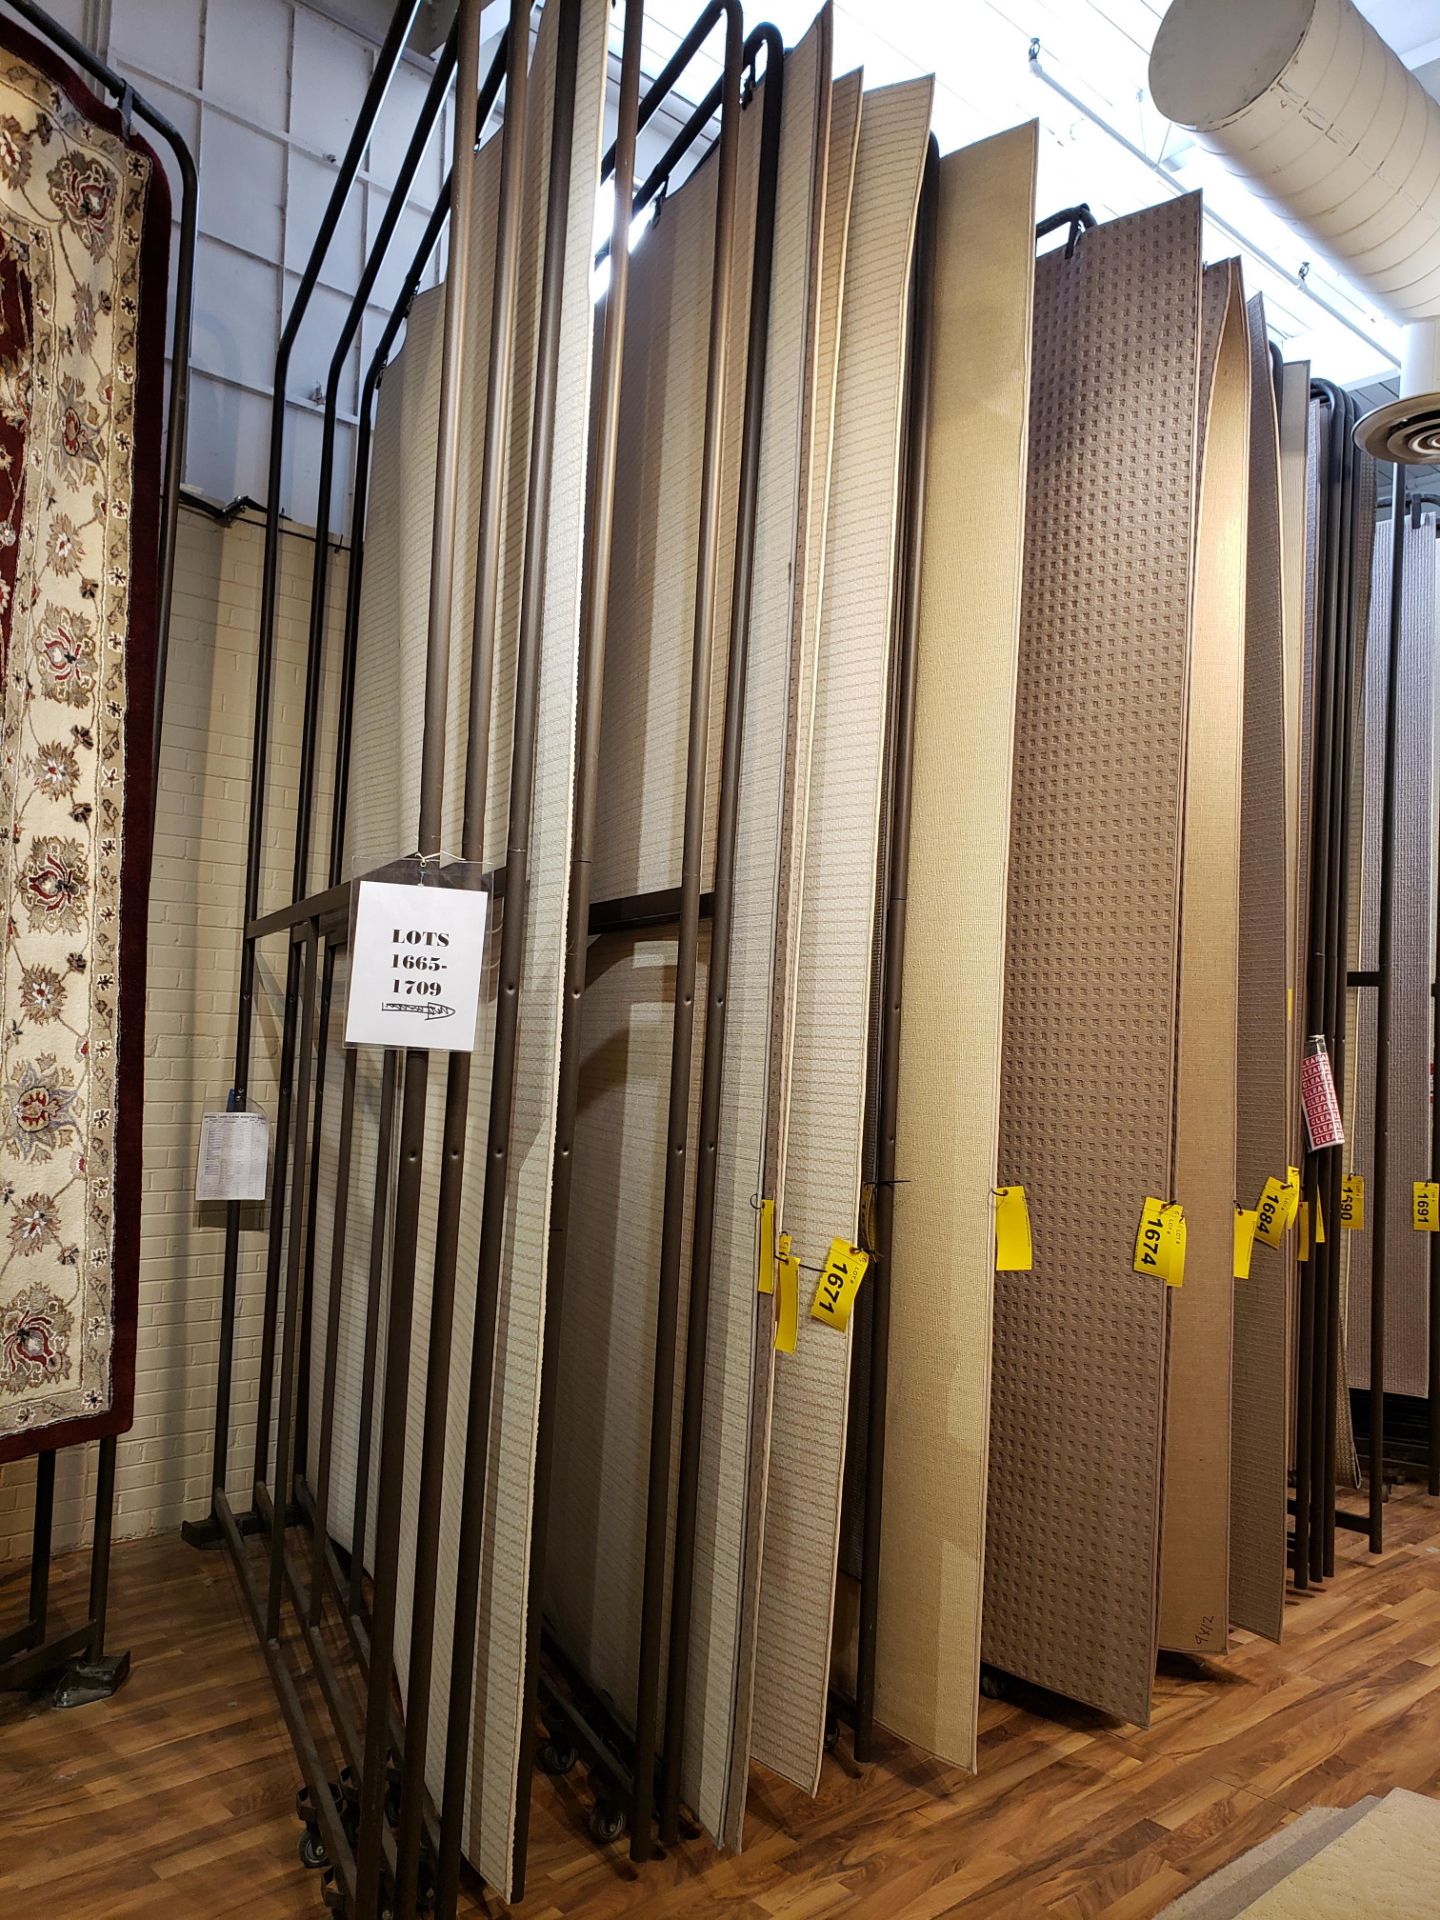 152" X 96" (15) SECTION CARPET DISPLAY RACK (SUBJECT TO LATE REMOVAL, PICKUP ON MARCH 25TH) - Image 2 of 3